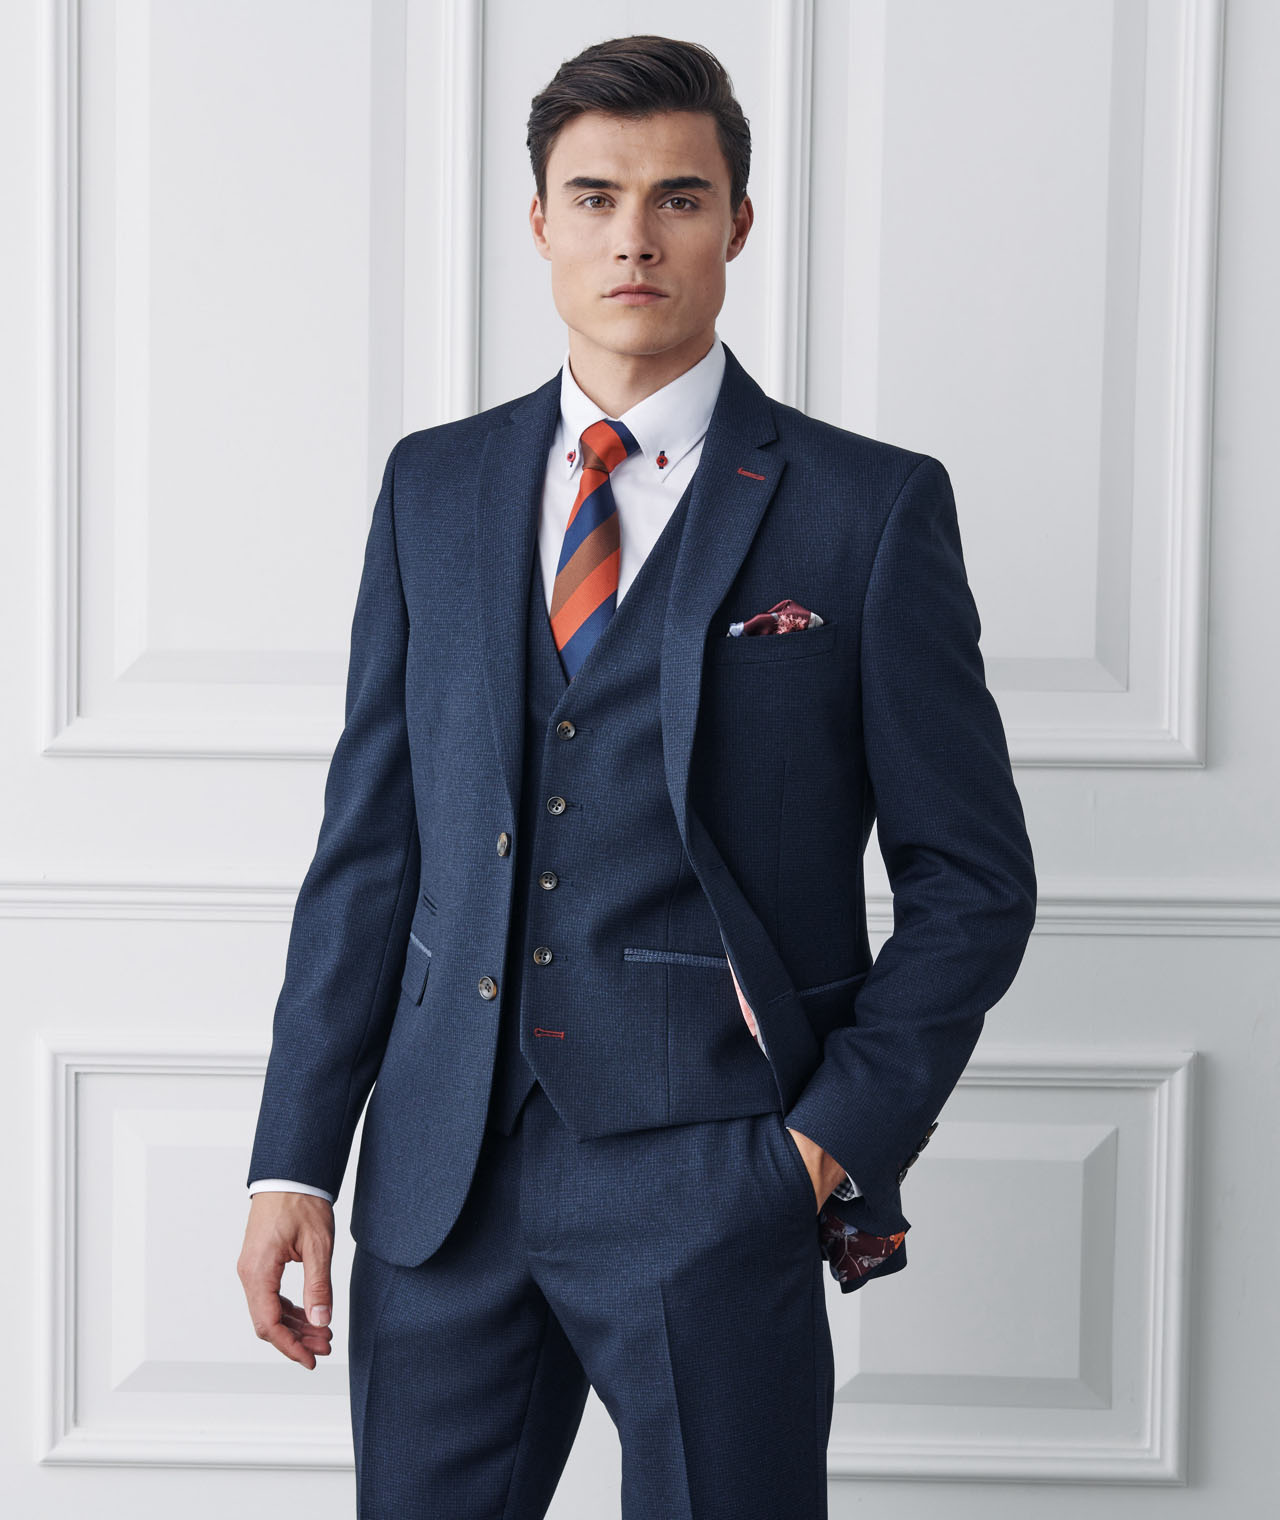 Men's Guide to Suits, Tailoring Tips